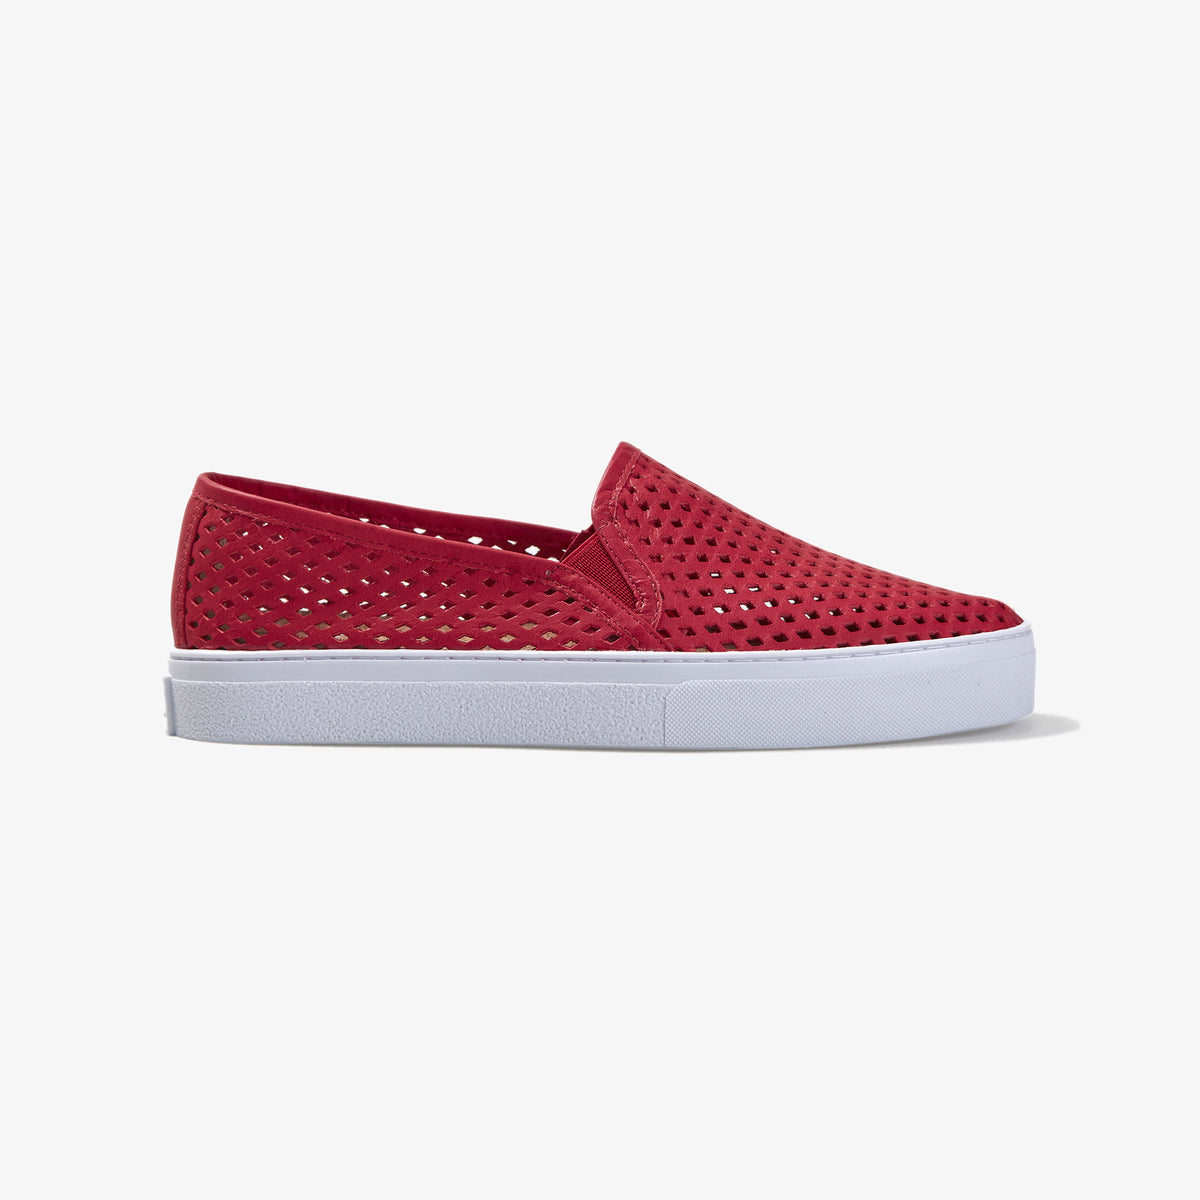 Jibs Classic | Real Leather Slip-on Shoes in True Red